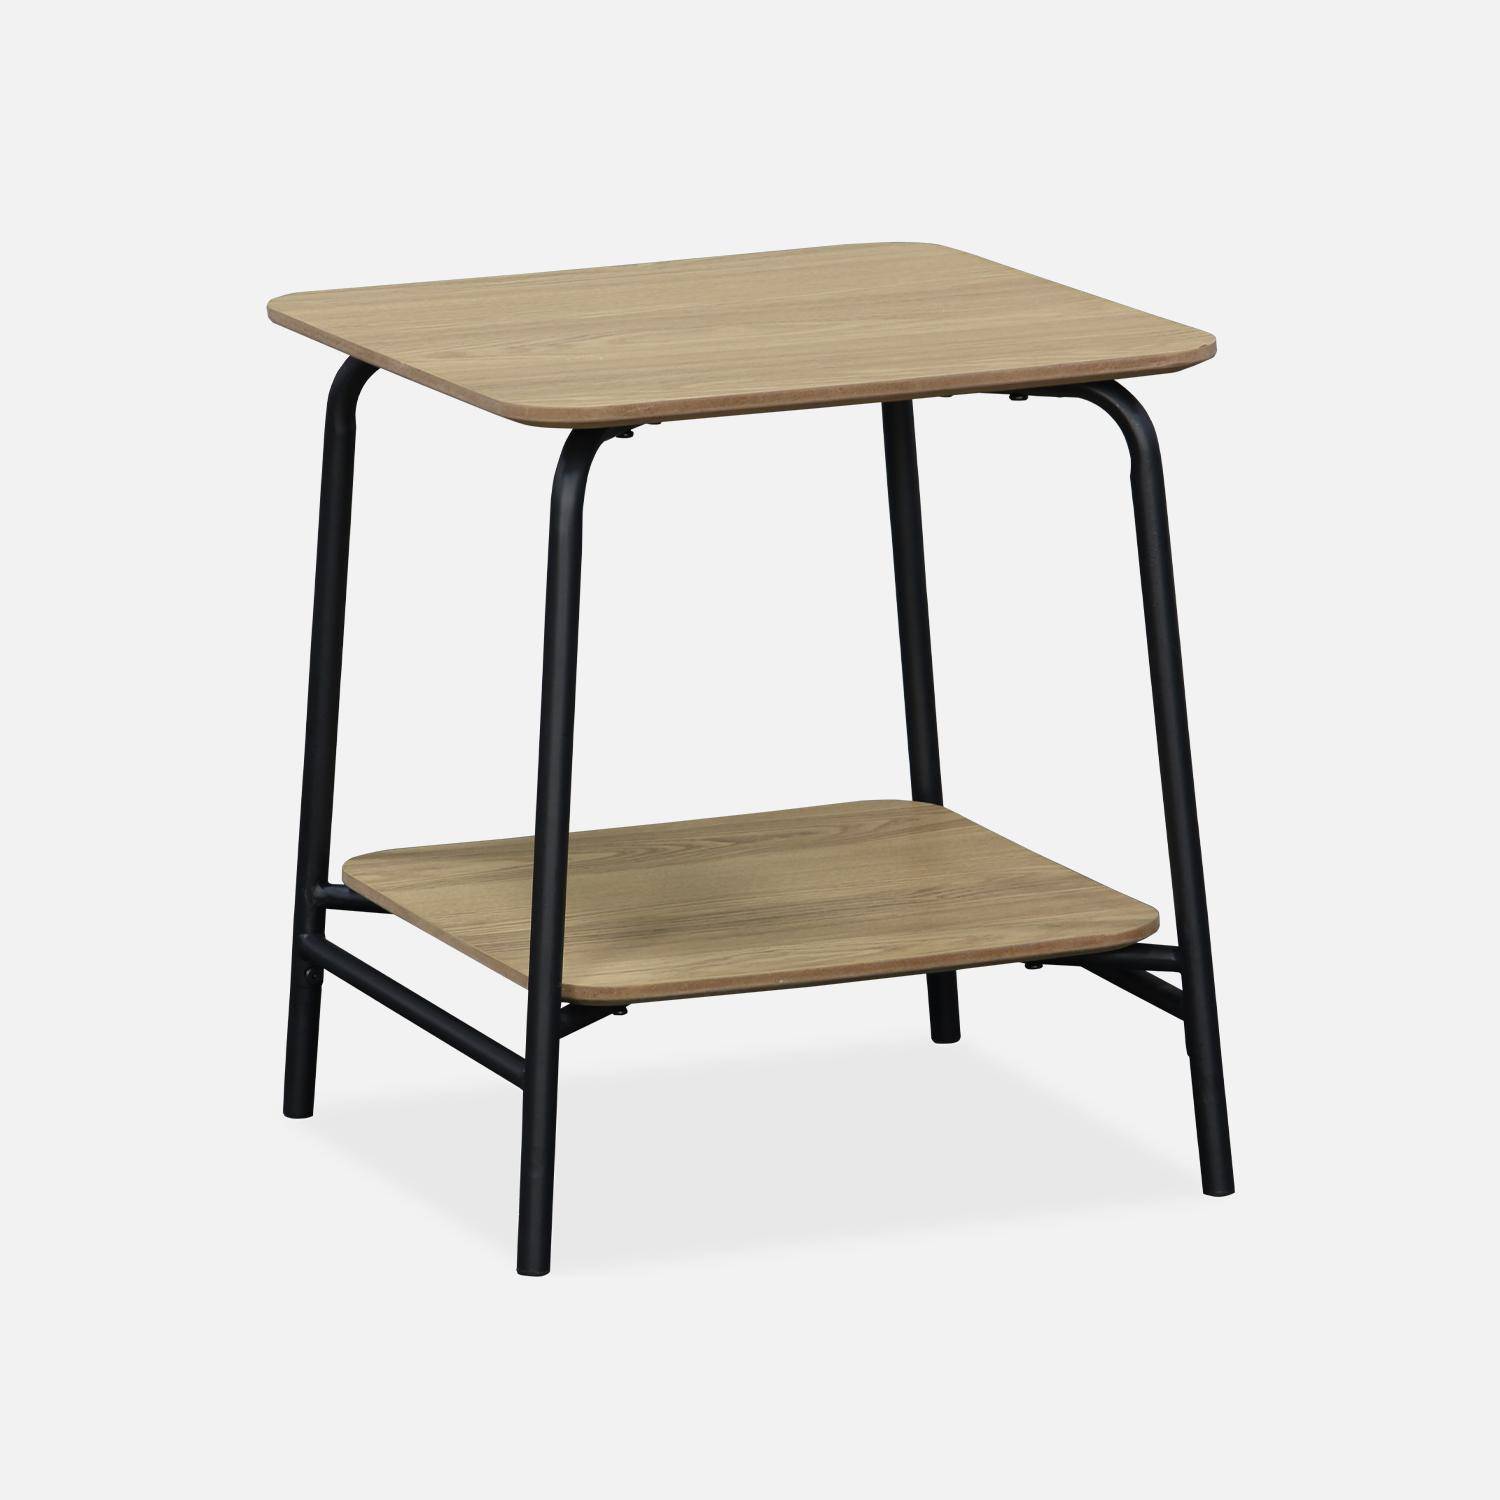 School table effect bedside table in wood decor with steel frame - 1 central shelf,sweeek,Photo4